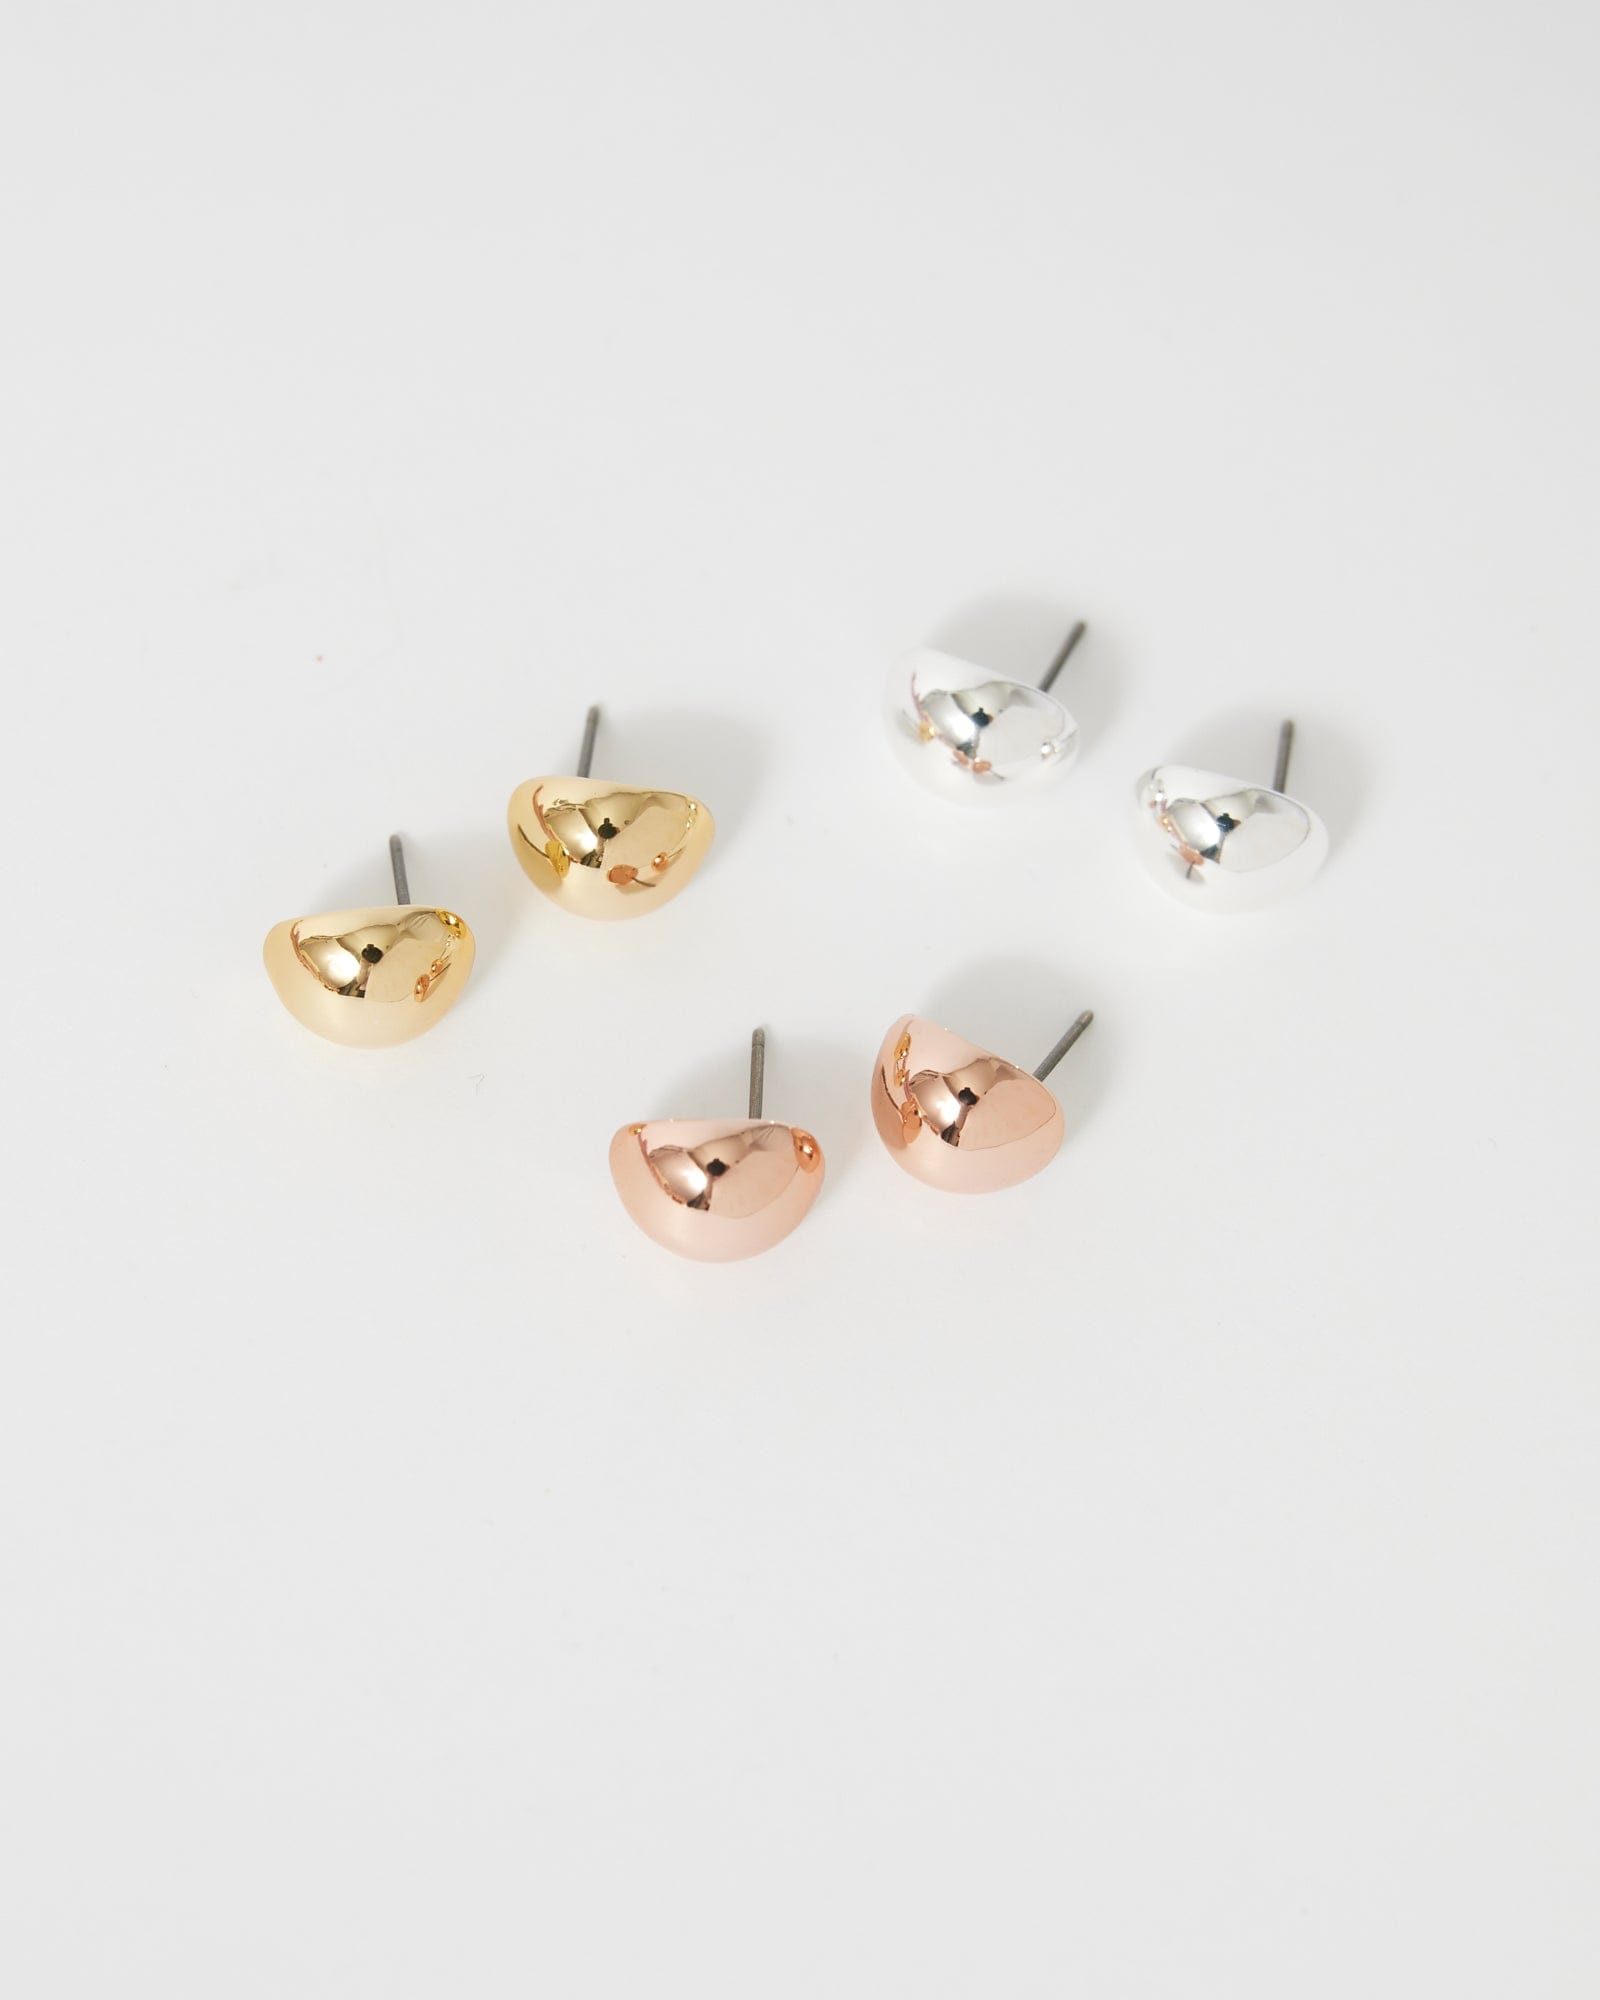 Set of 3 bubble earrings in gold, silver and rose gold